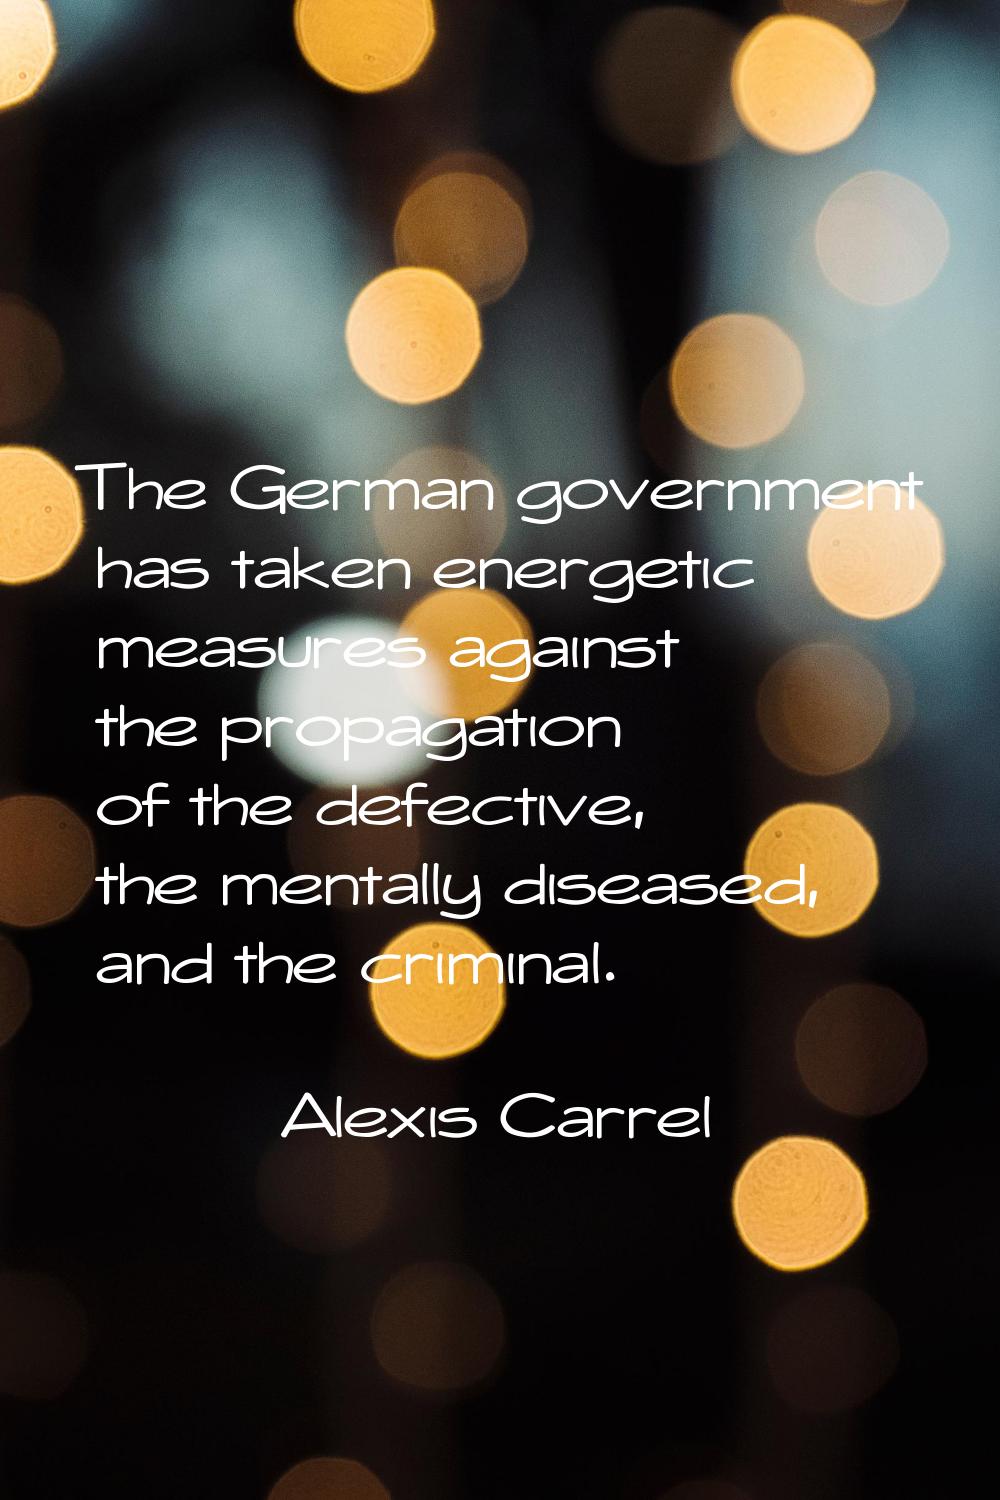 The German government has taken energetic measures against the propagation of the defective, the me